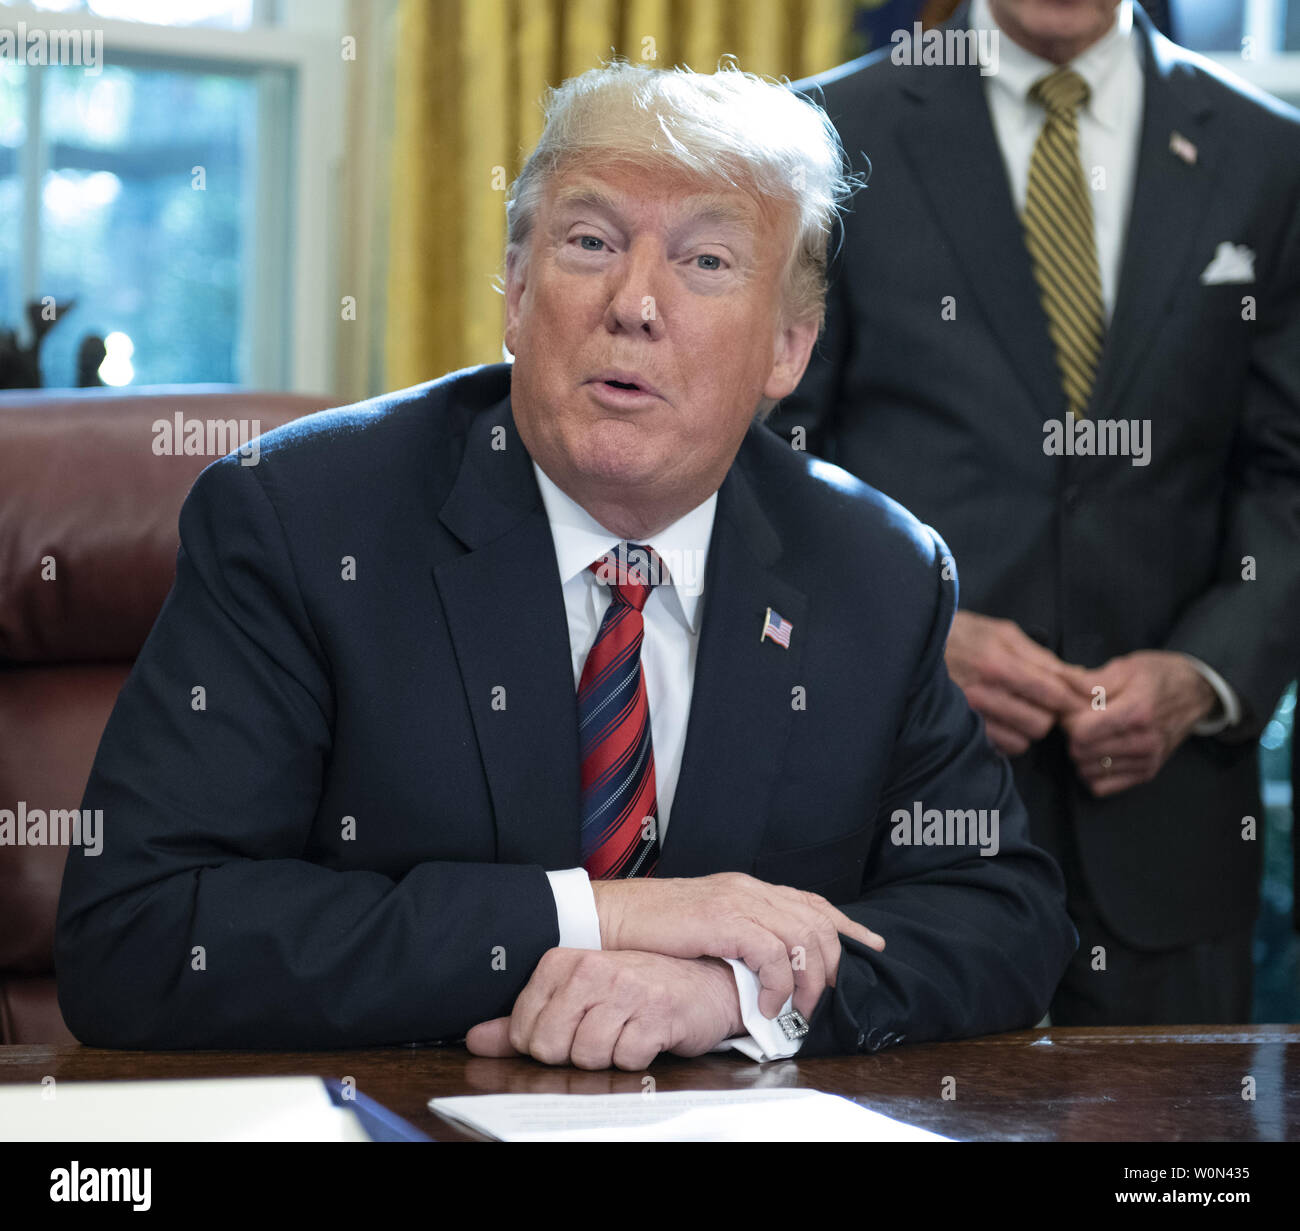 United States President Donald J. Trump signs S.3021, America's Water Infrastructure Act of 2018 in the Oval Office of the White House in Washington, DC on Tuesday, October 23, 2018.  After signing the bill, the President took questions from the pool on the caravan and Saudi Arabia.      Photo by Ron Sachs/UPI Stock Photo